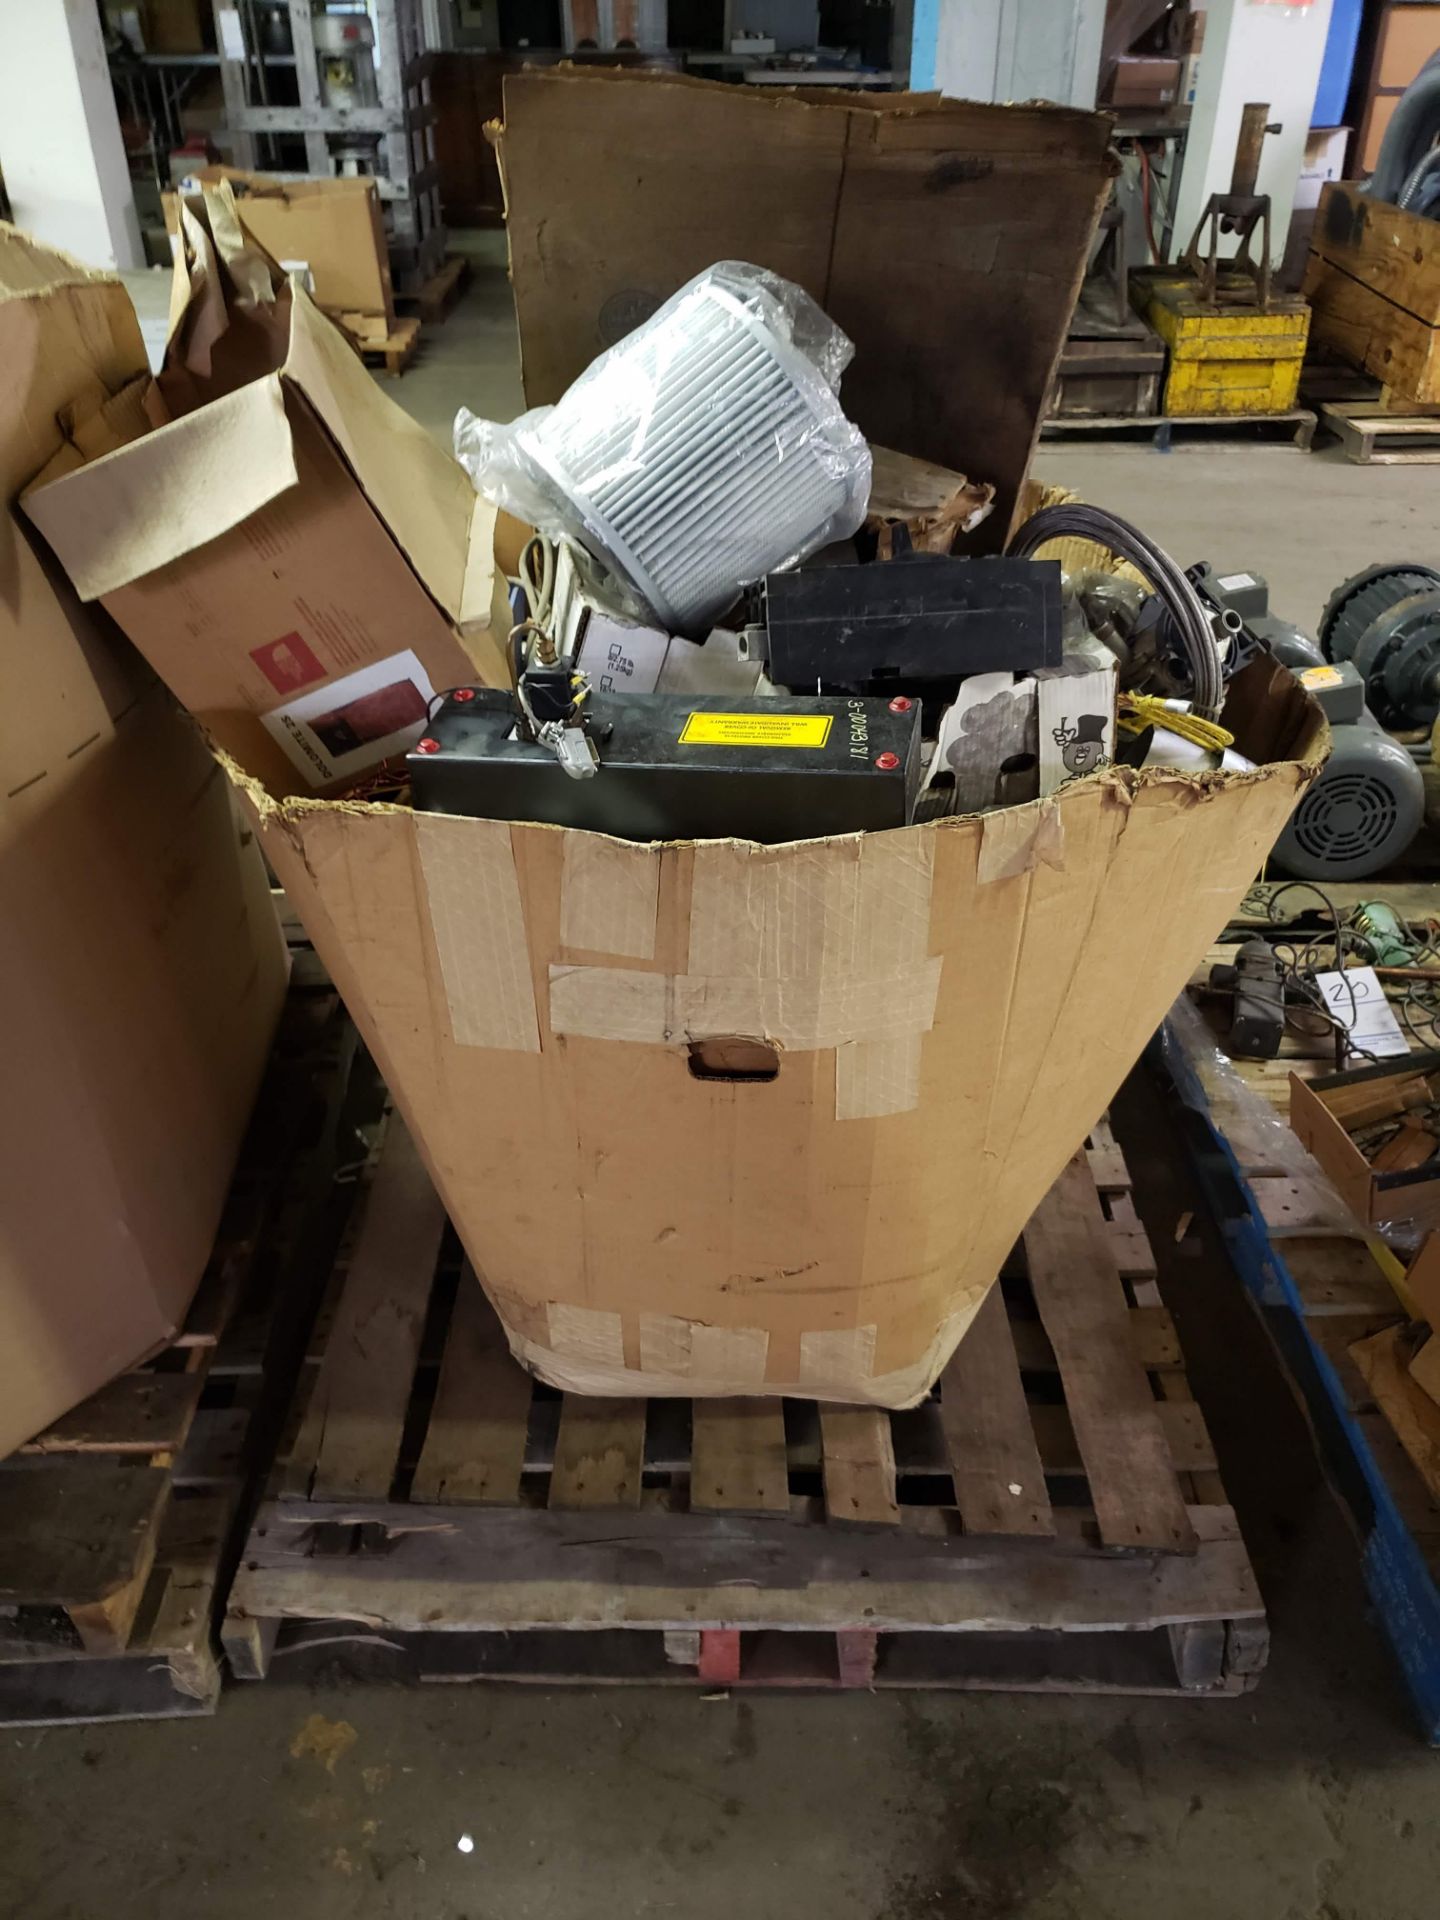 Skid of electrical parts and misc